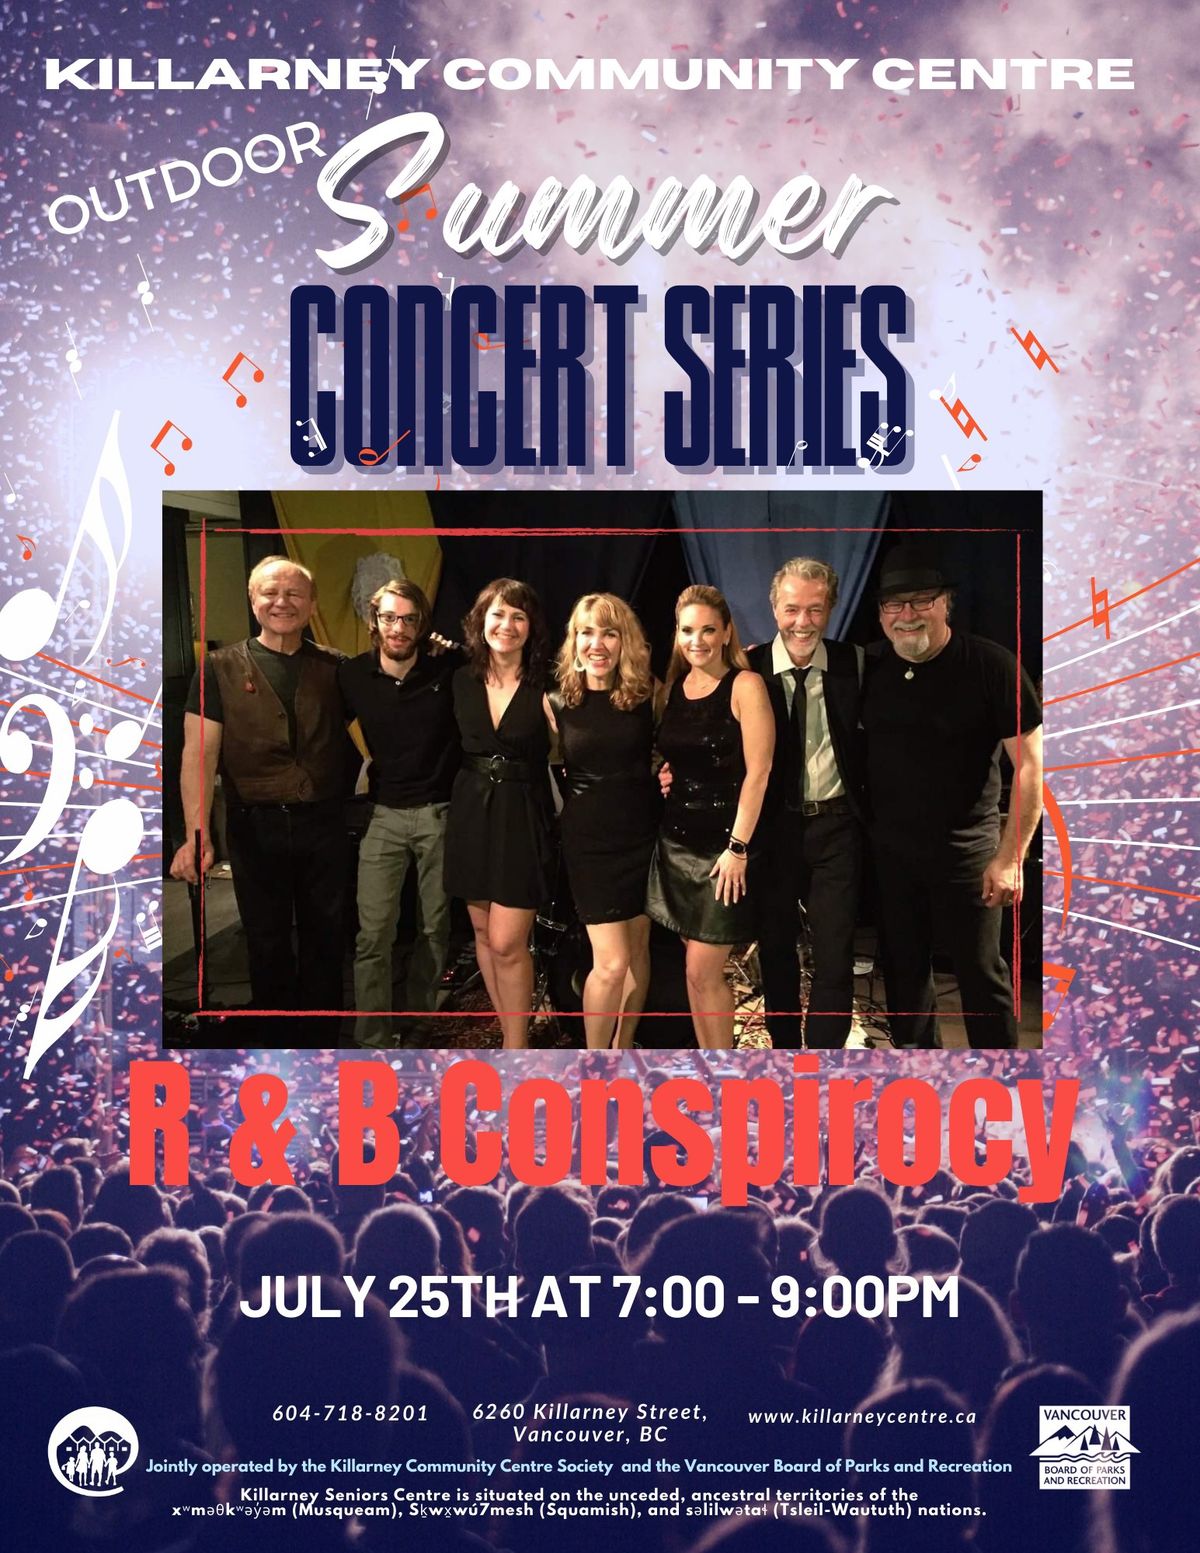 2nd Annual Killarney Community Centre Outdoor Summer Concert Series